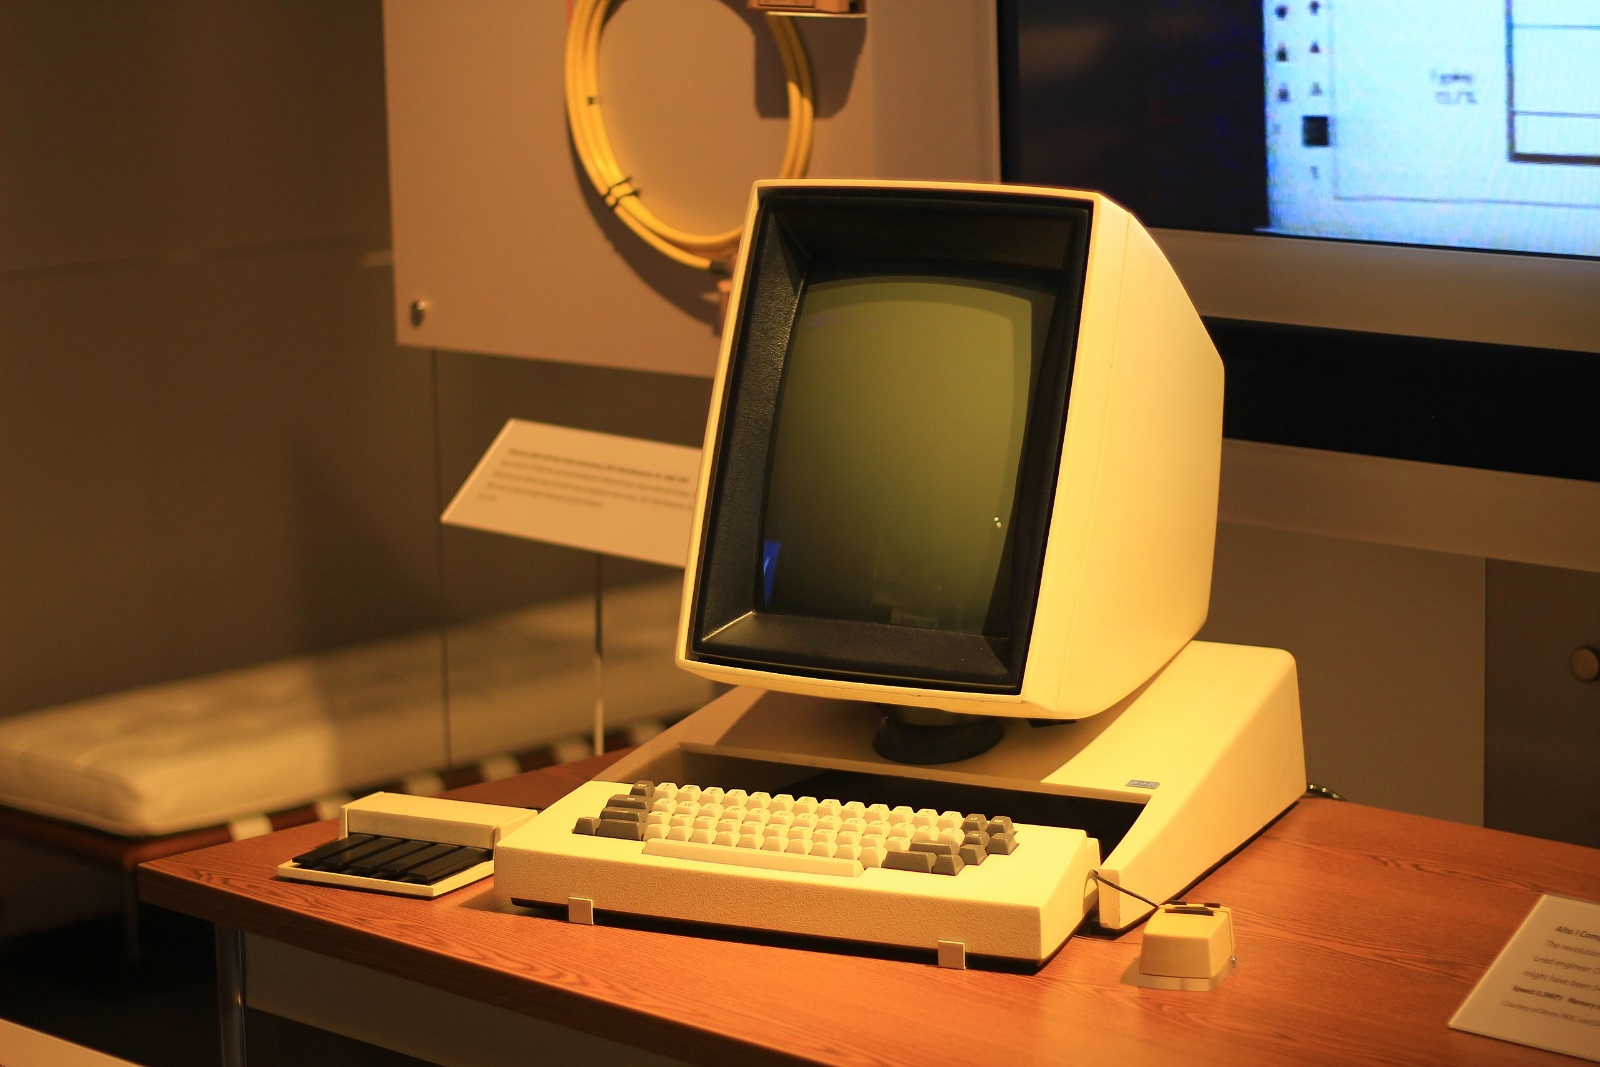 Xerox Alto - the first computer equipped with a display